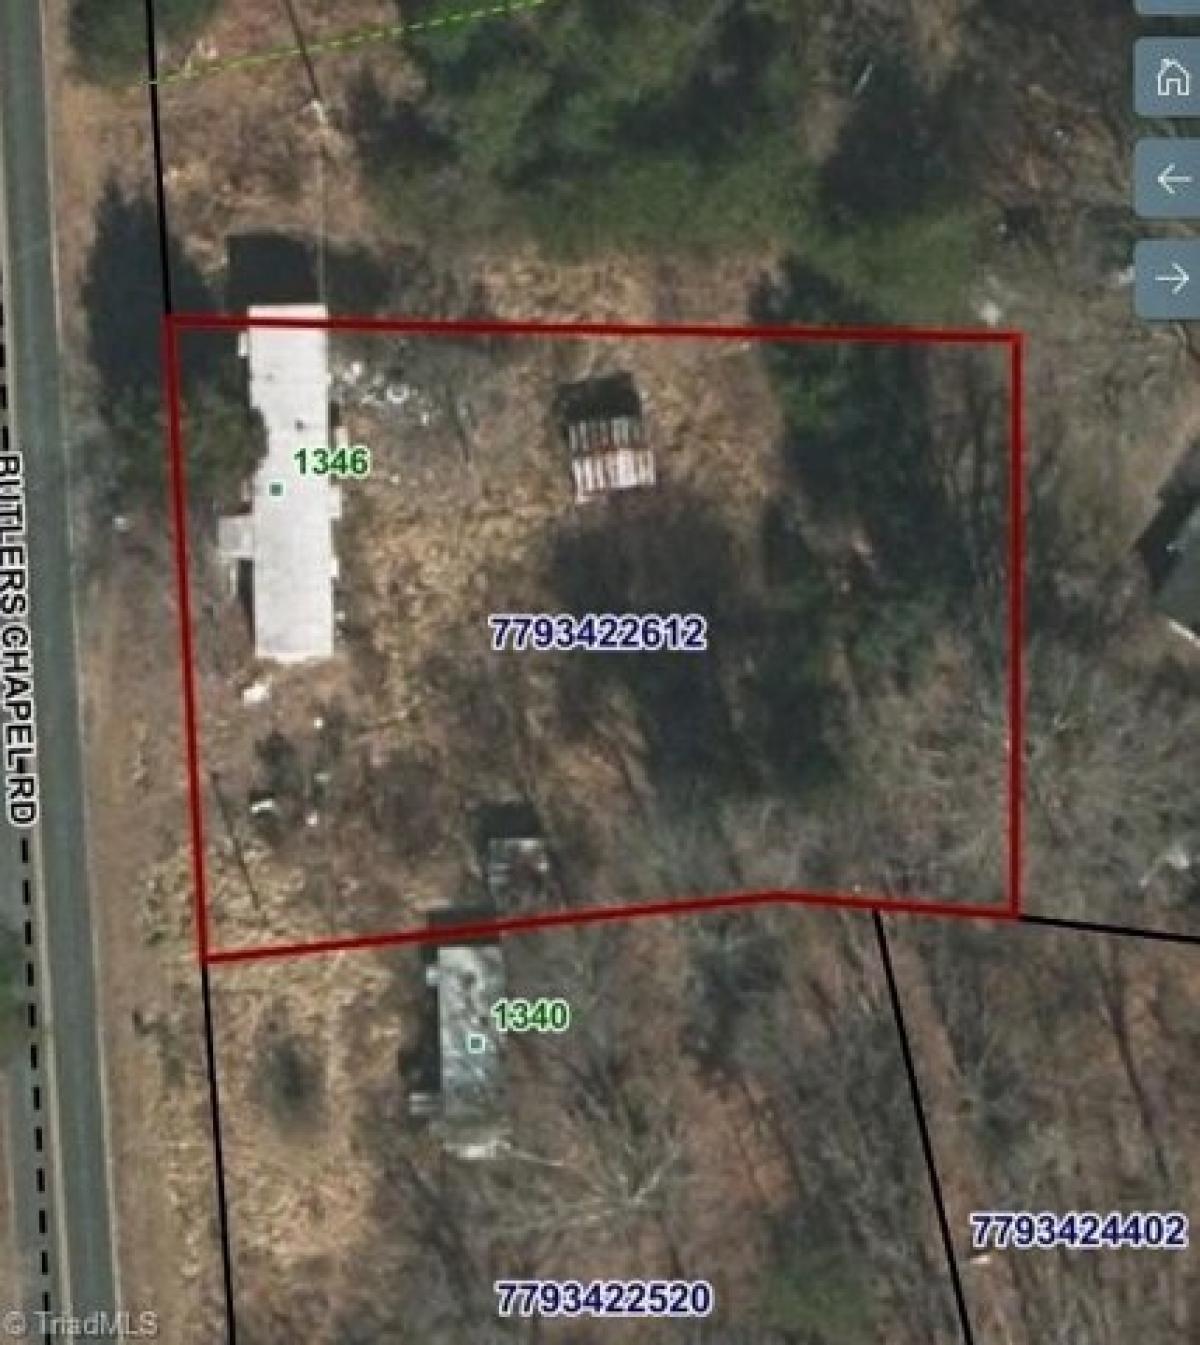 Picture of Residential Land For Sale in Franklinville, North Carolina, United States